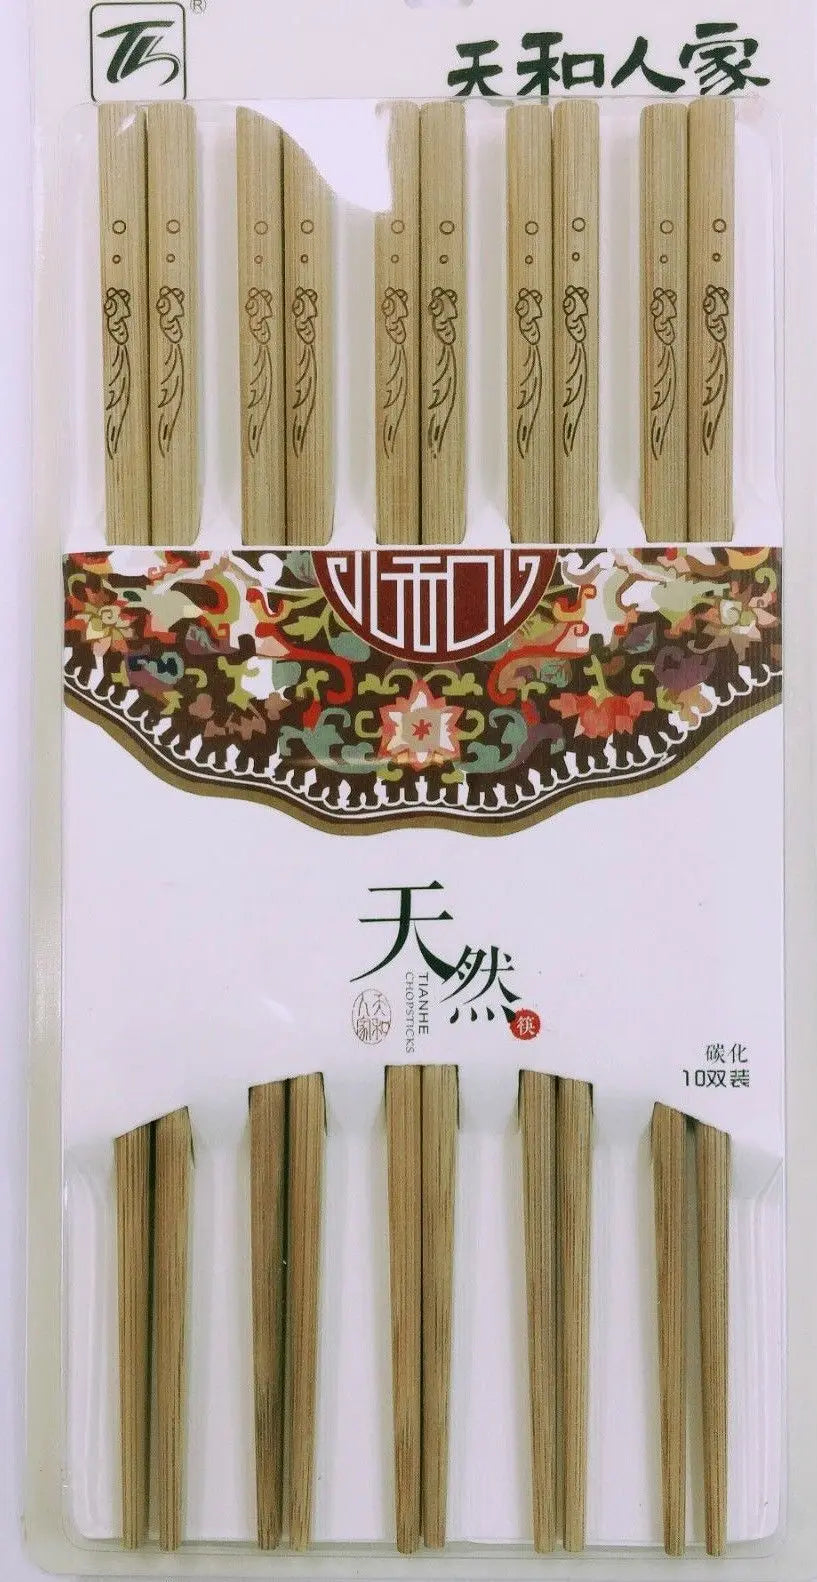 10 Pairs High Quality BAMBOO CHOPSTICKS Wooden Dinner Gift Natural Healthy everythingbamboo